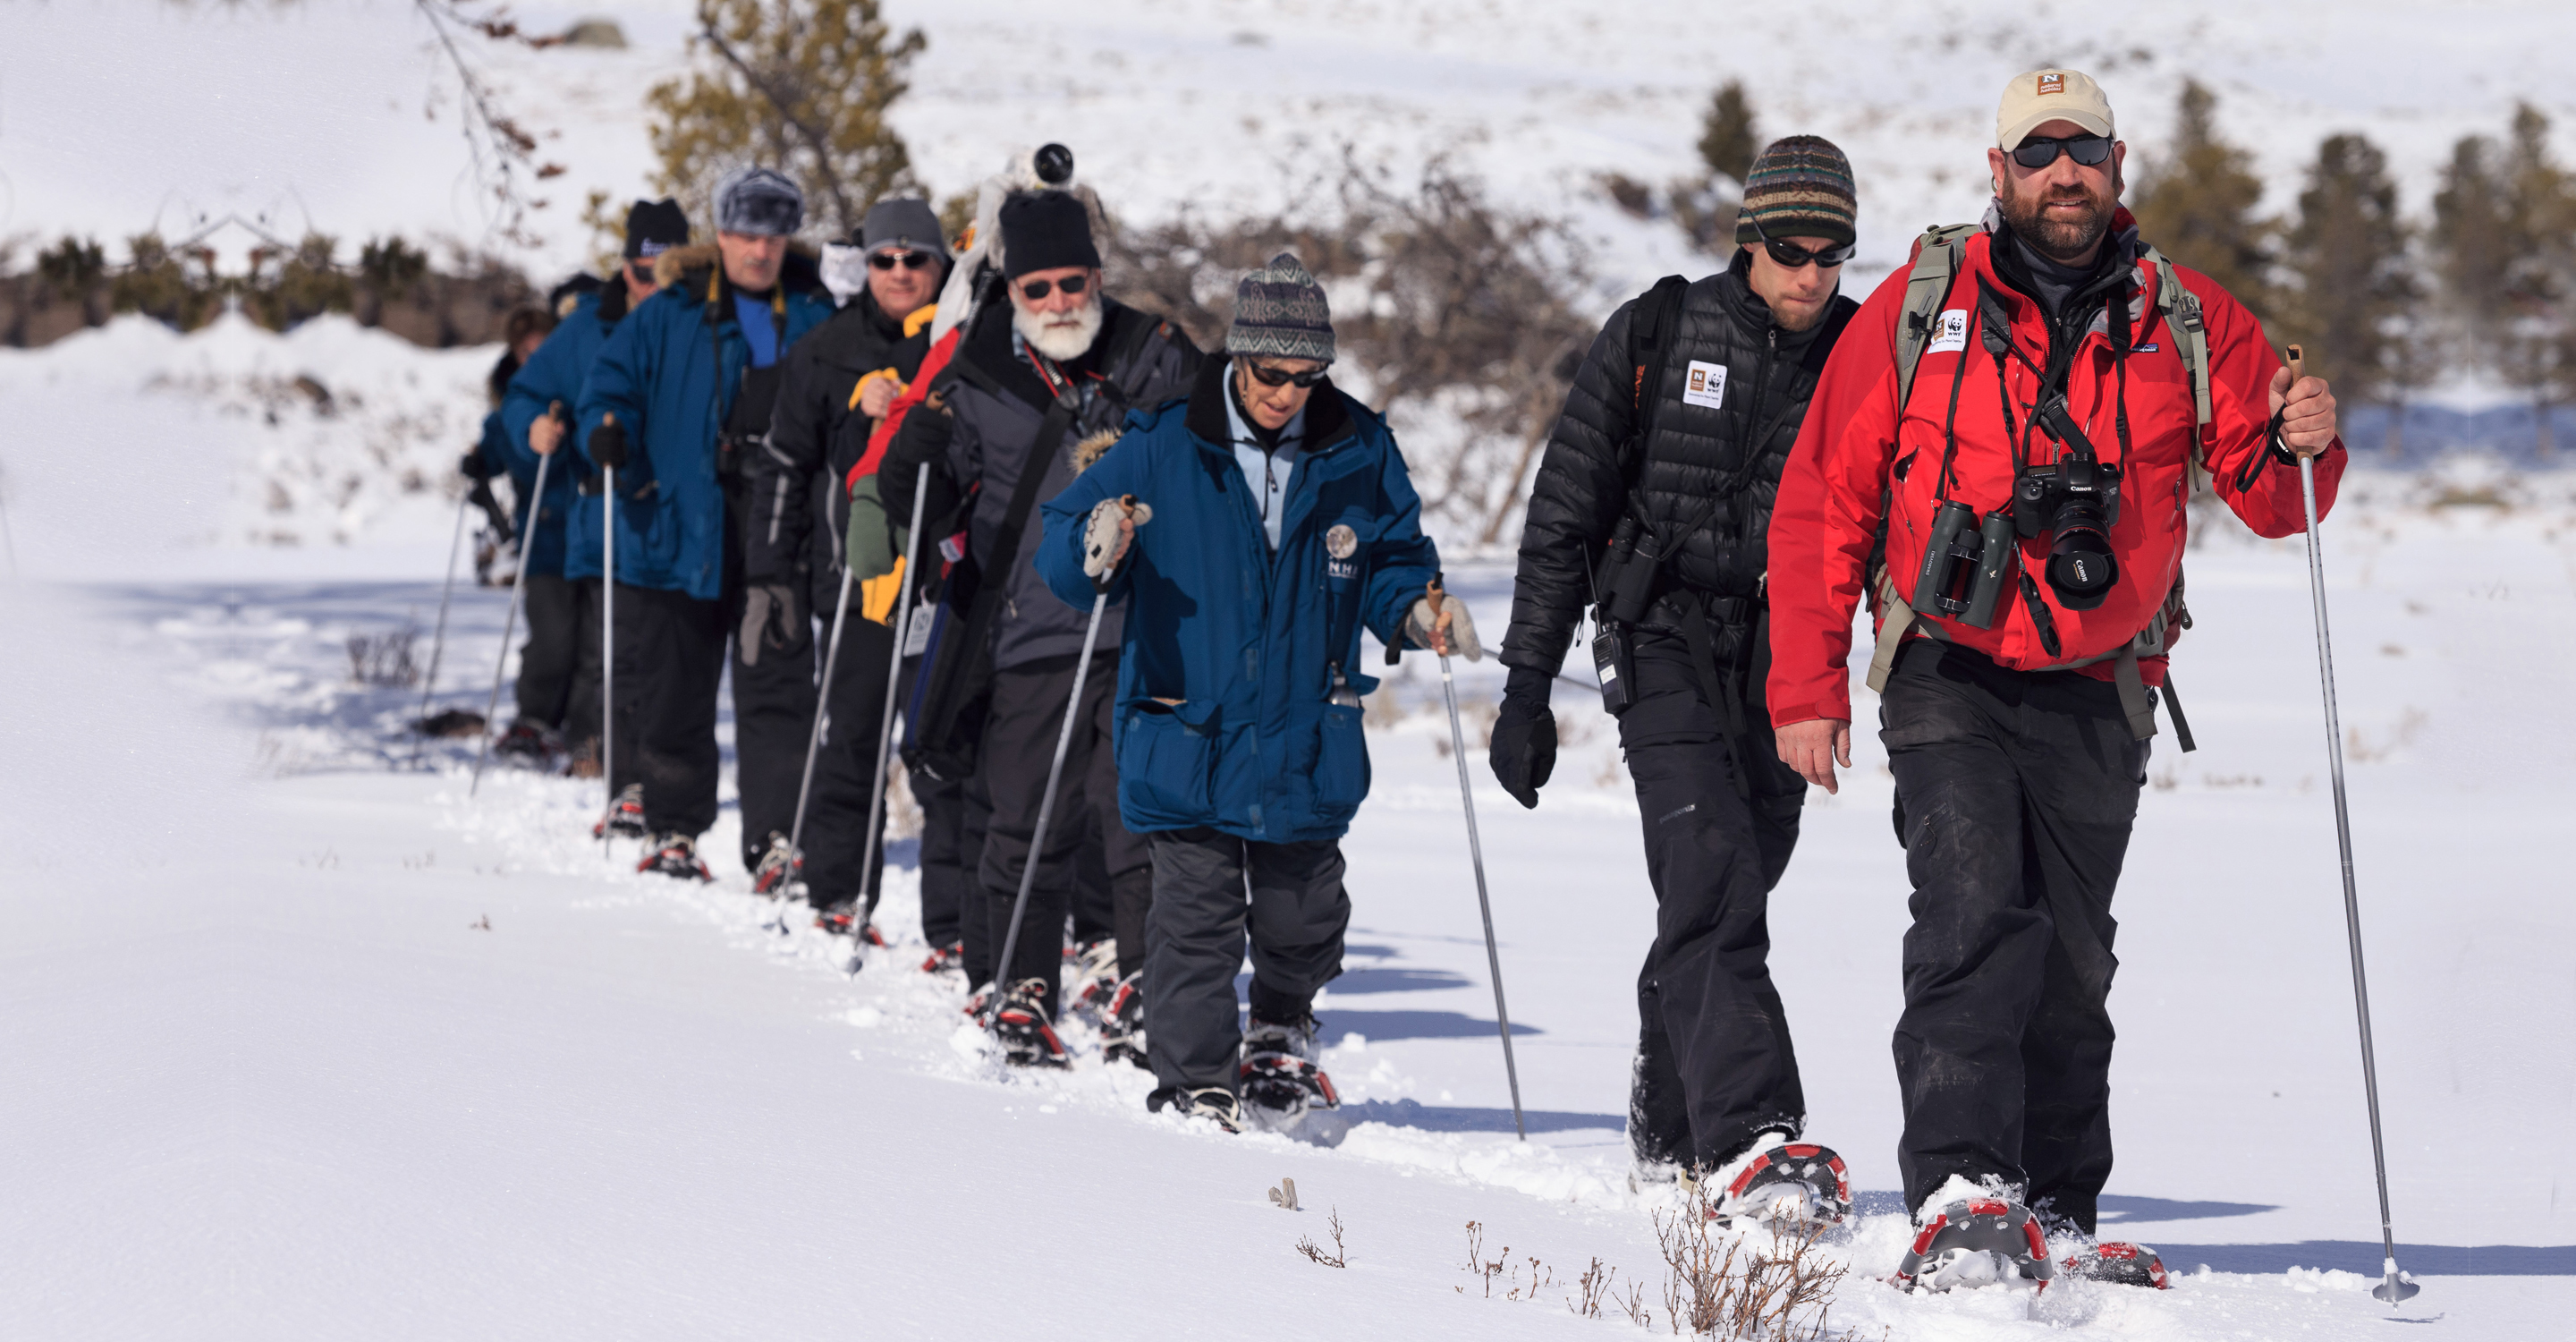 Guides lead Natural Habitat Adventures travelers in a snowshoeing activity in Yellowstone National Park, United States